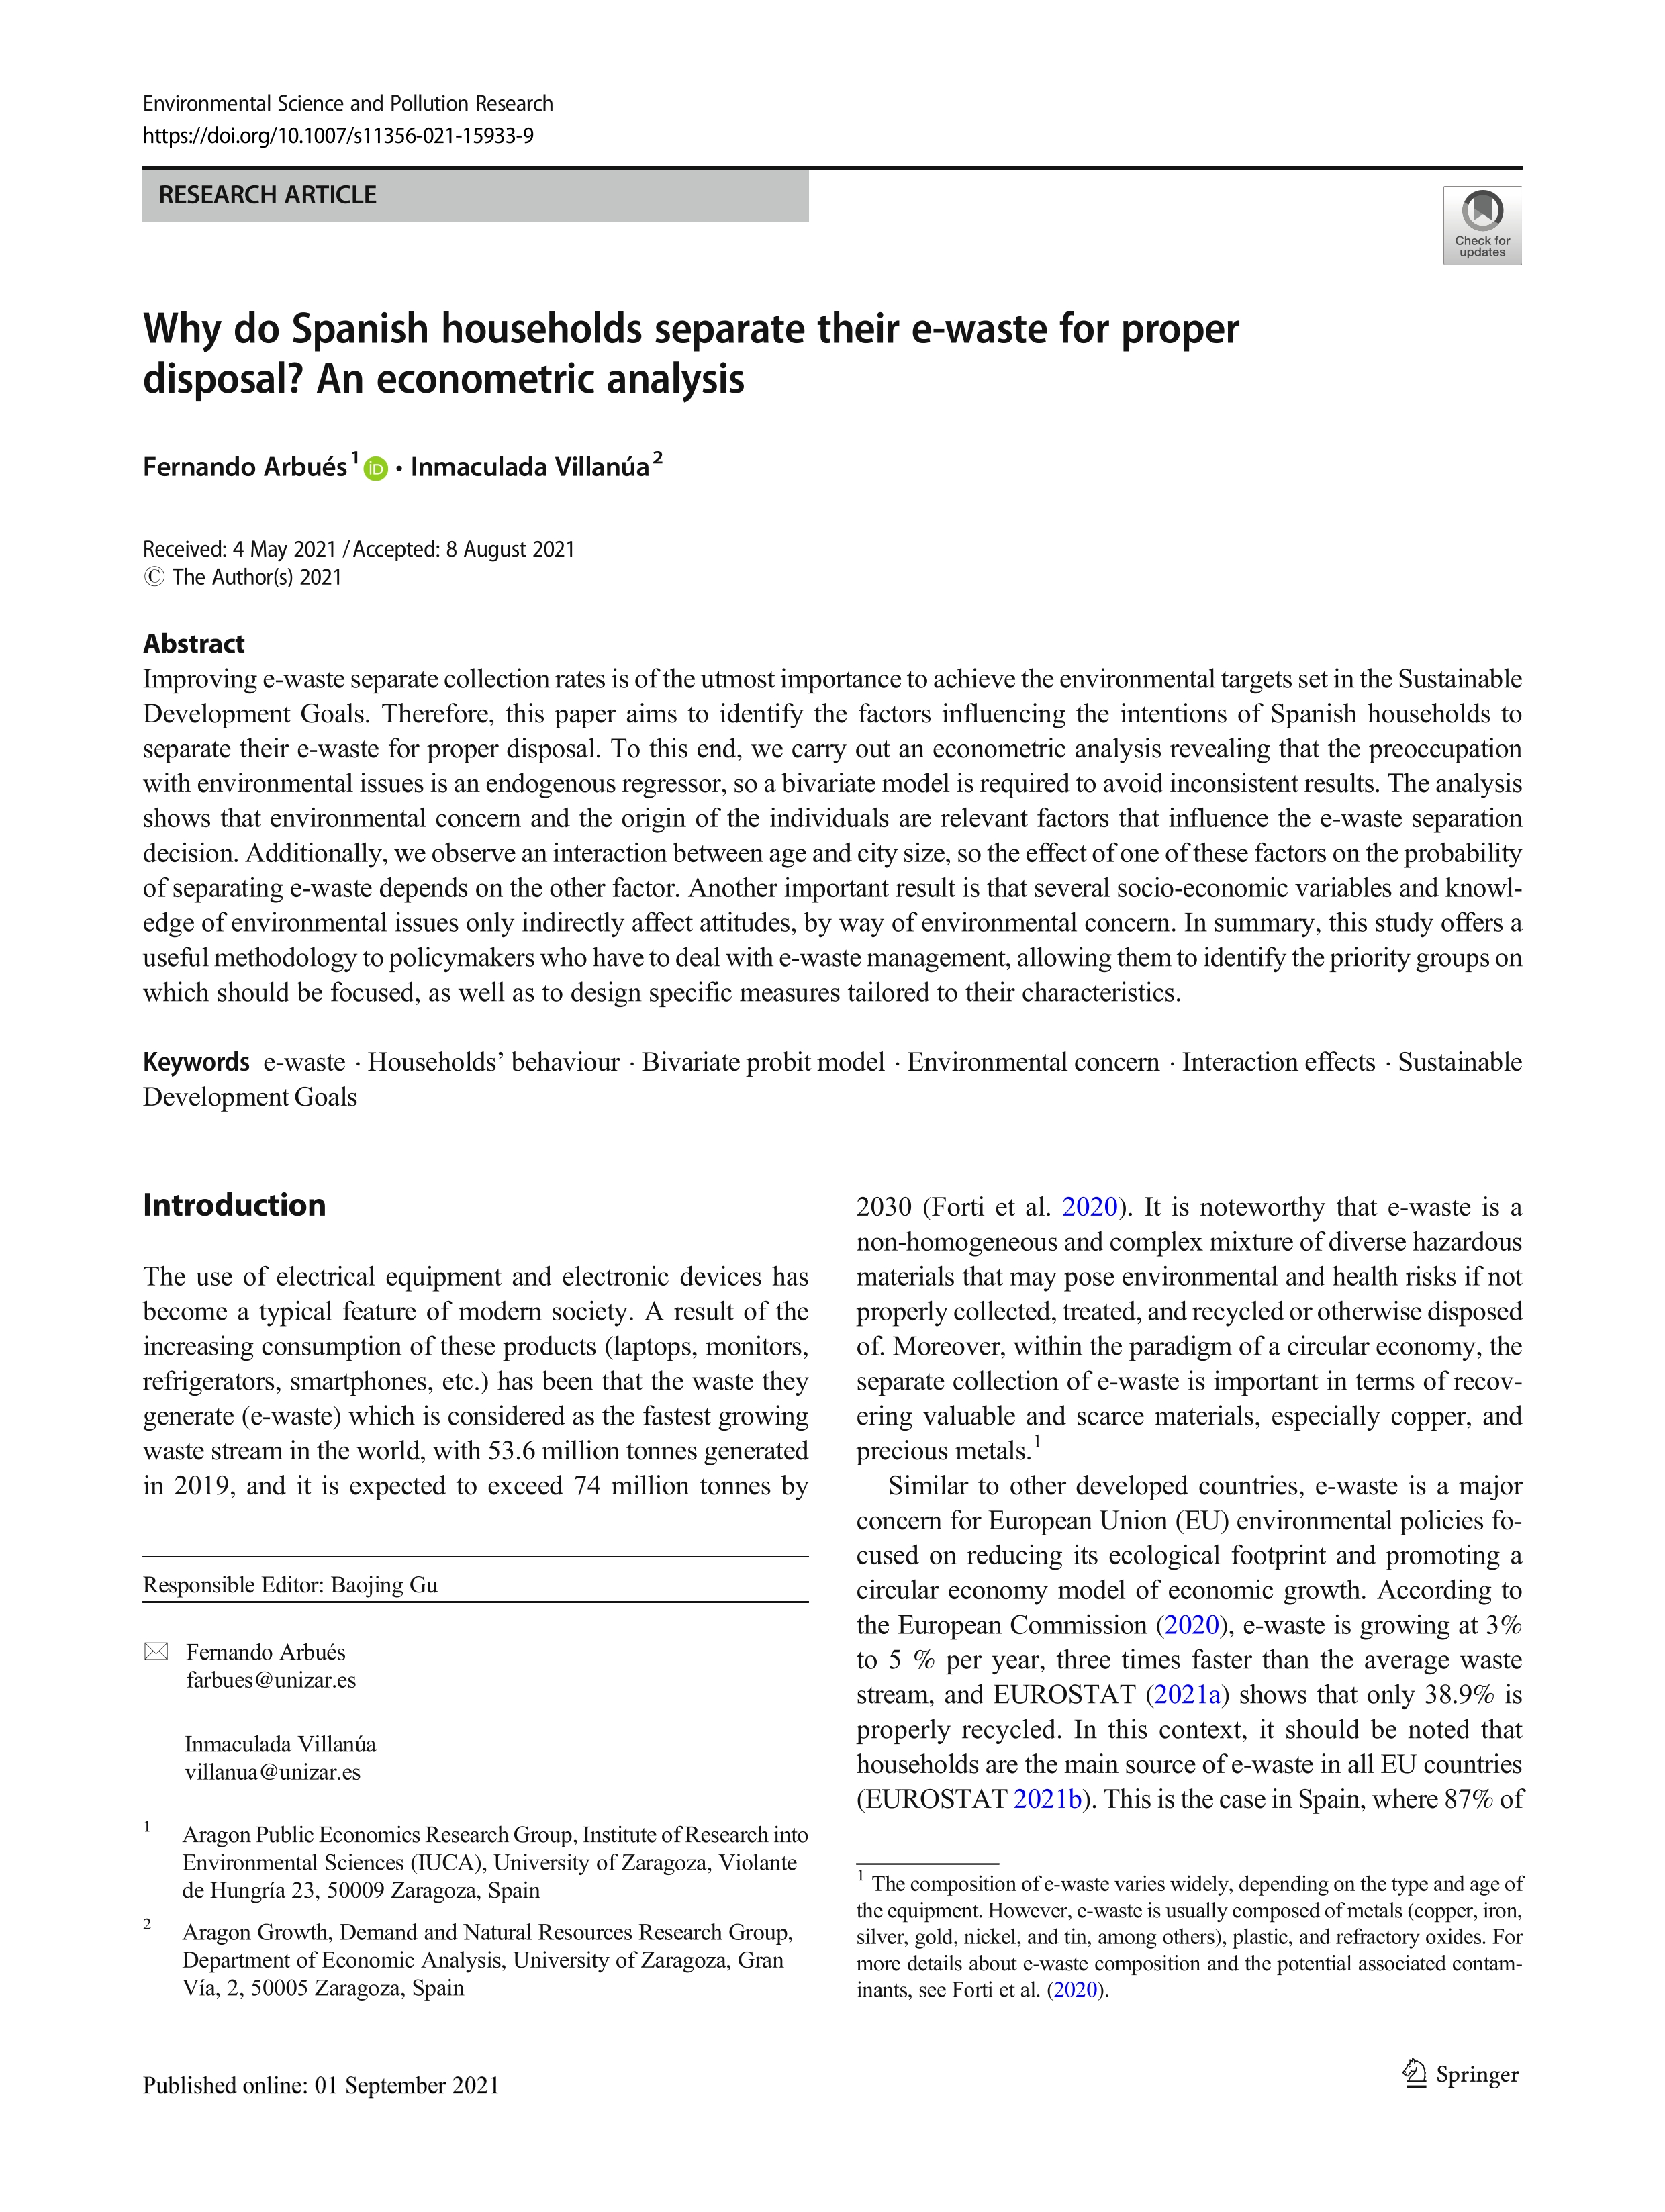 Why do Spanish households separate their e-waste for proper disposal? An econometric analysis